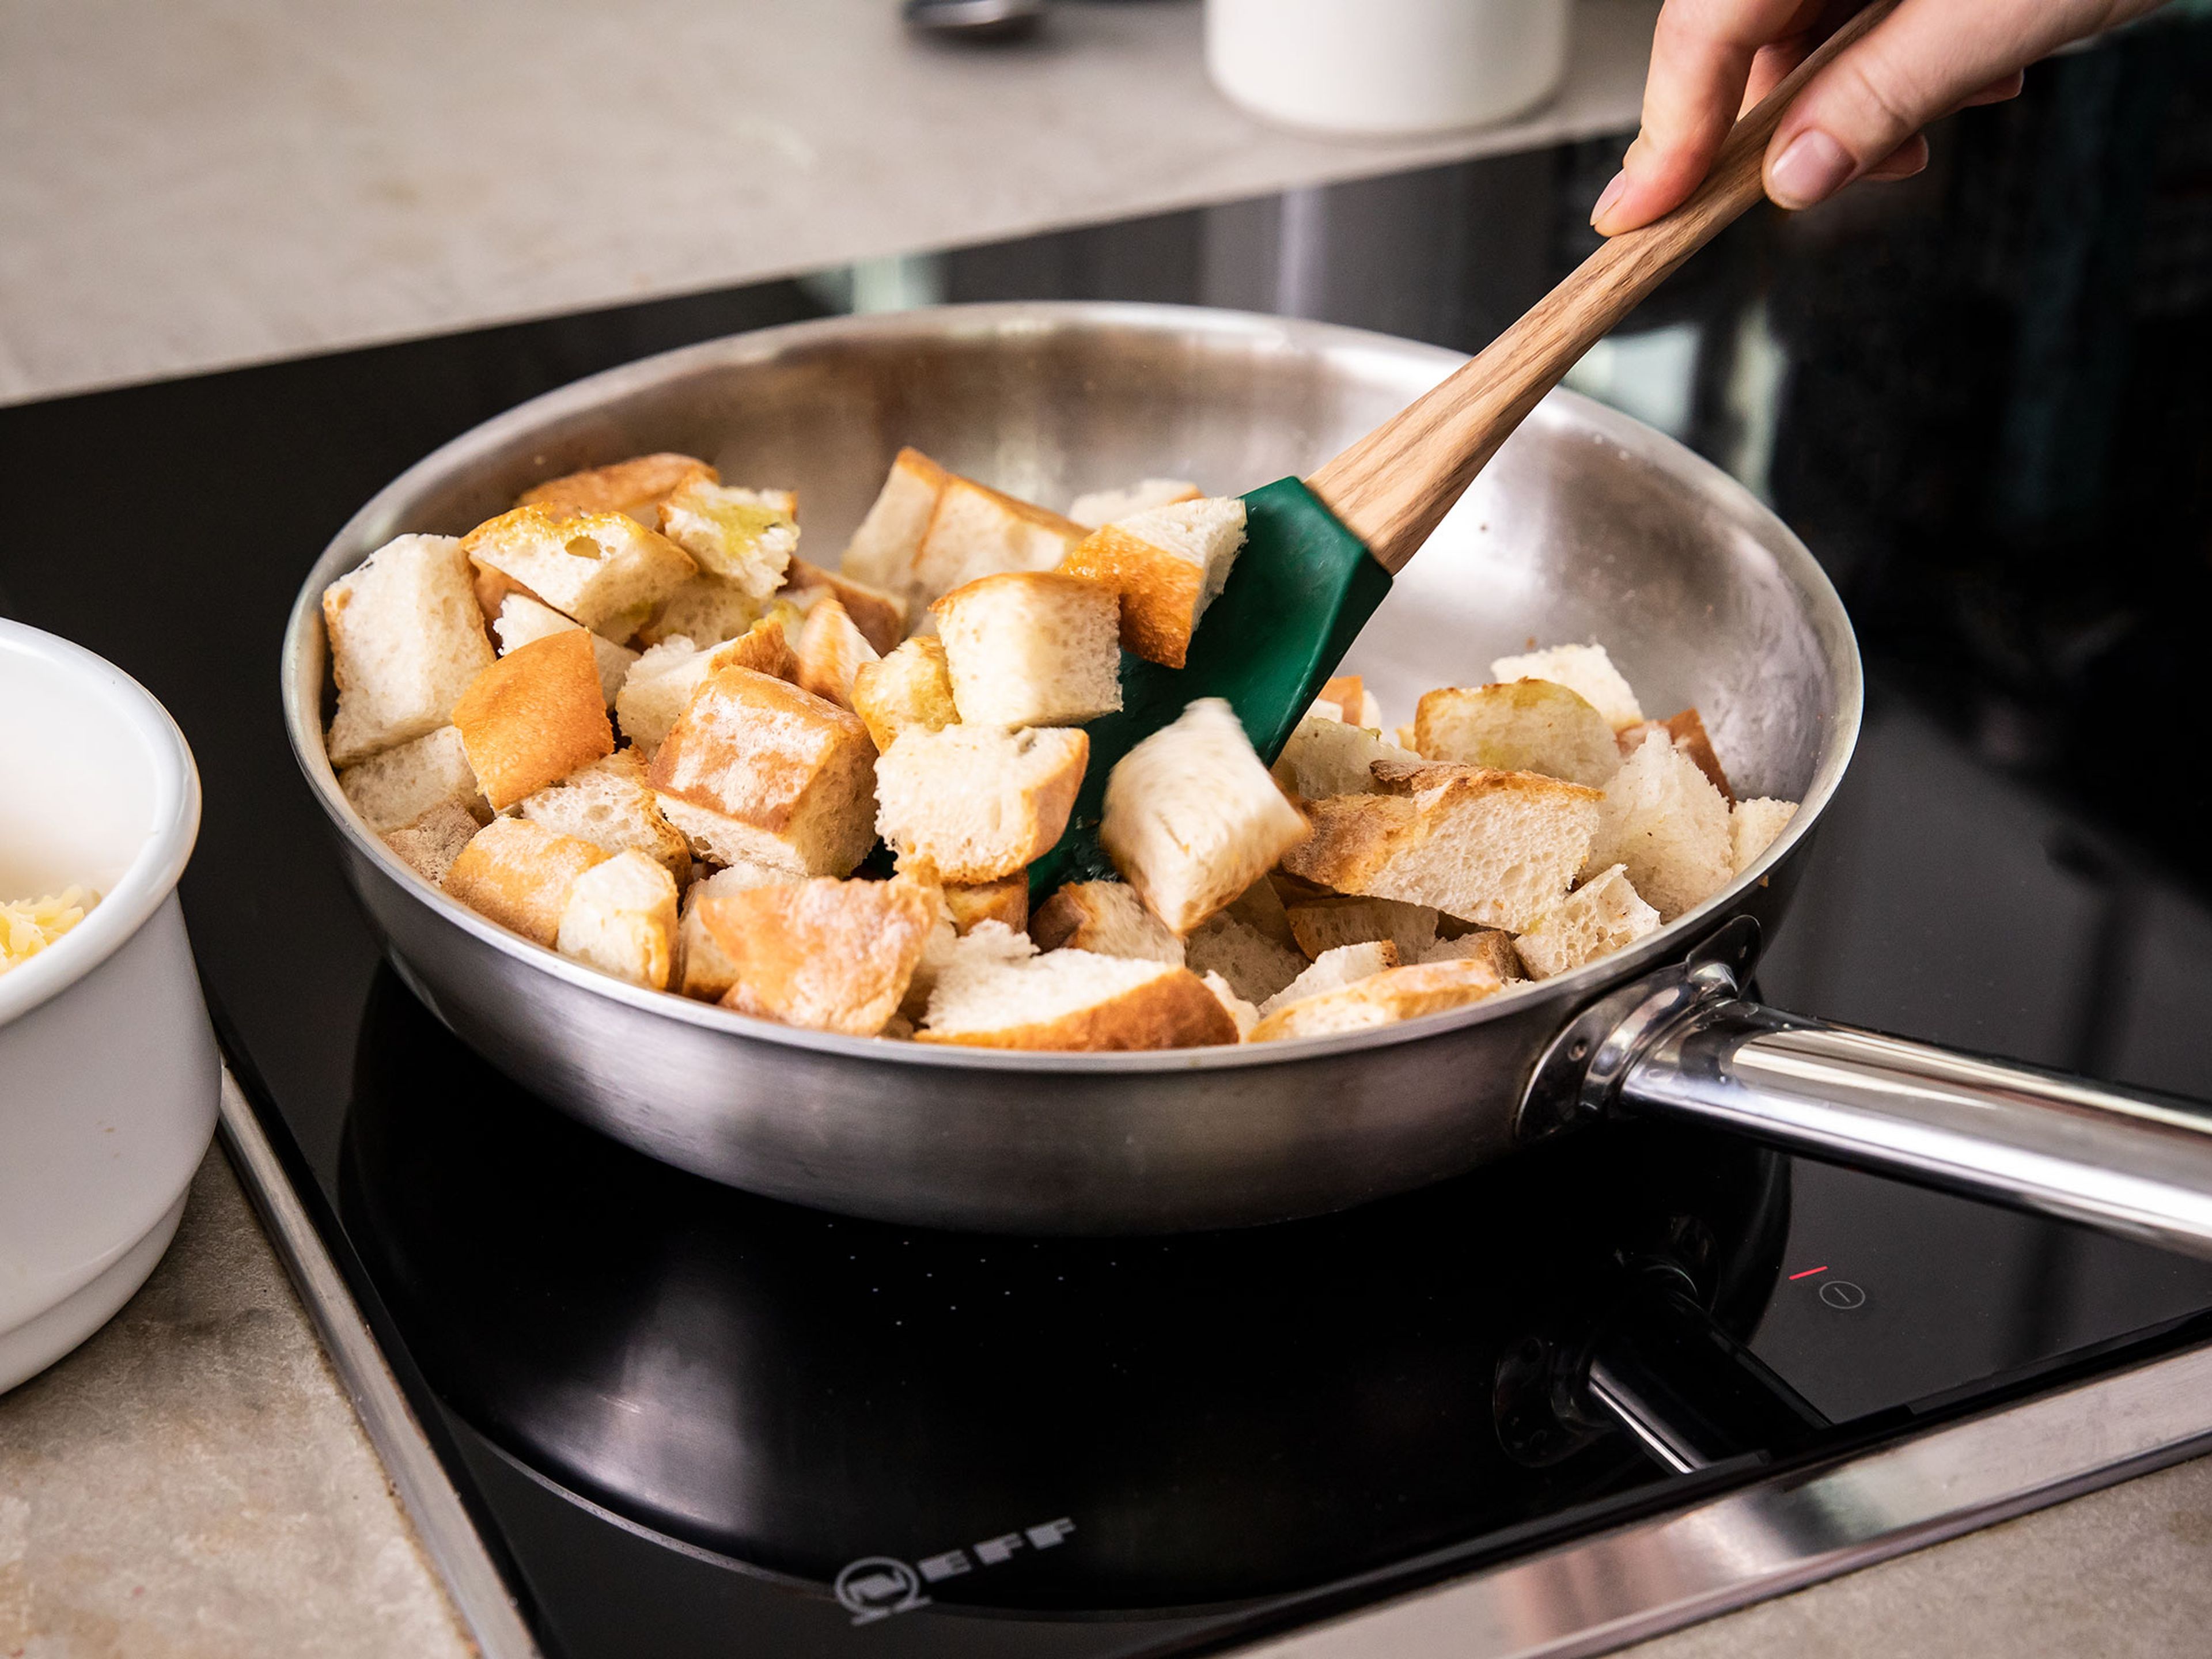 Heat a tablespoon of oil in a frying pan, add the cubed baguette, and fry on medium-high heat on all sides until golden. Season with salt and pepper. Remove the bread from the pan and leave on a plate lined with kitchen towel to soak up excess oil.